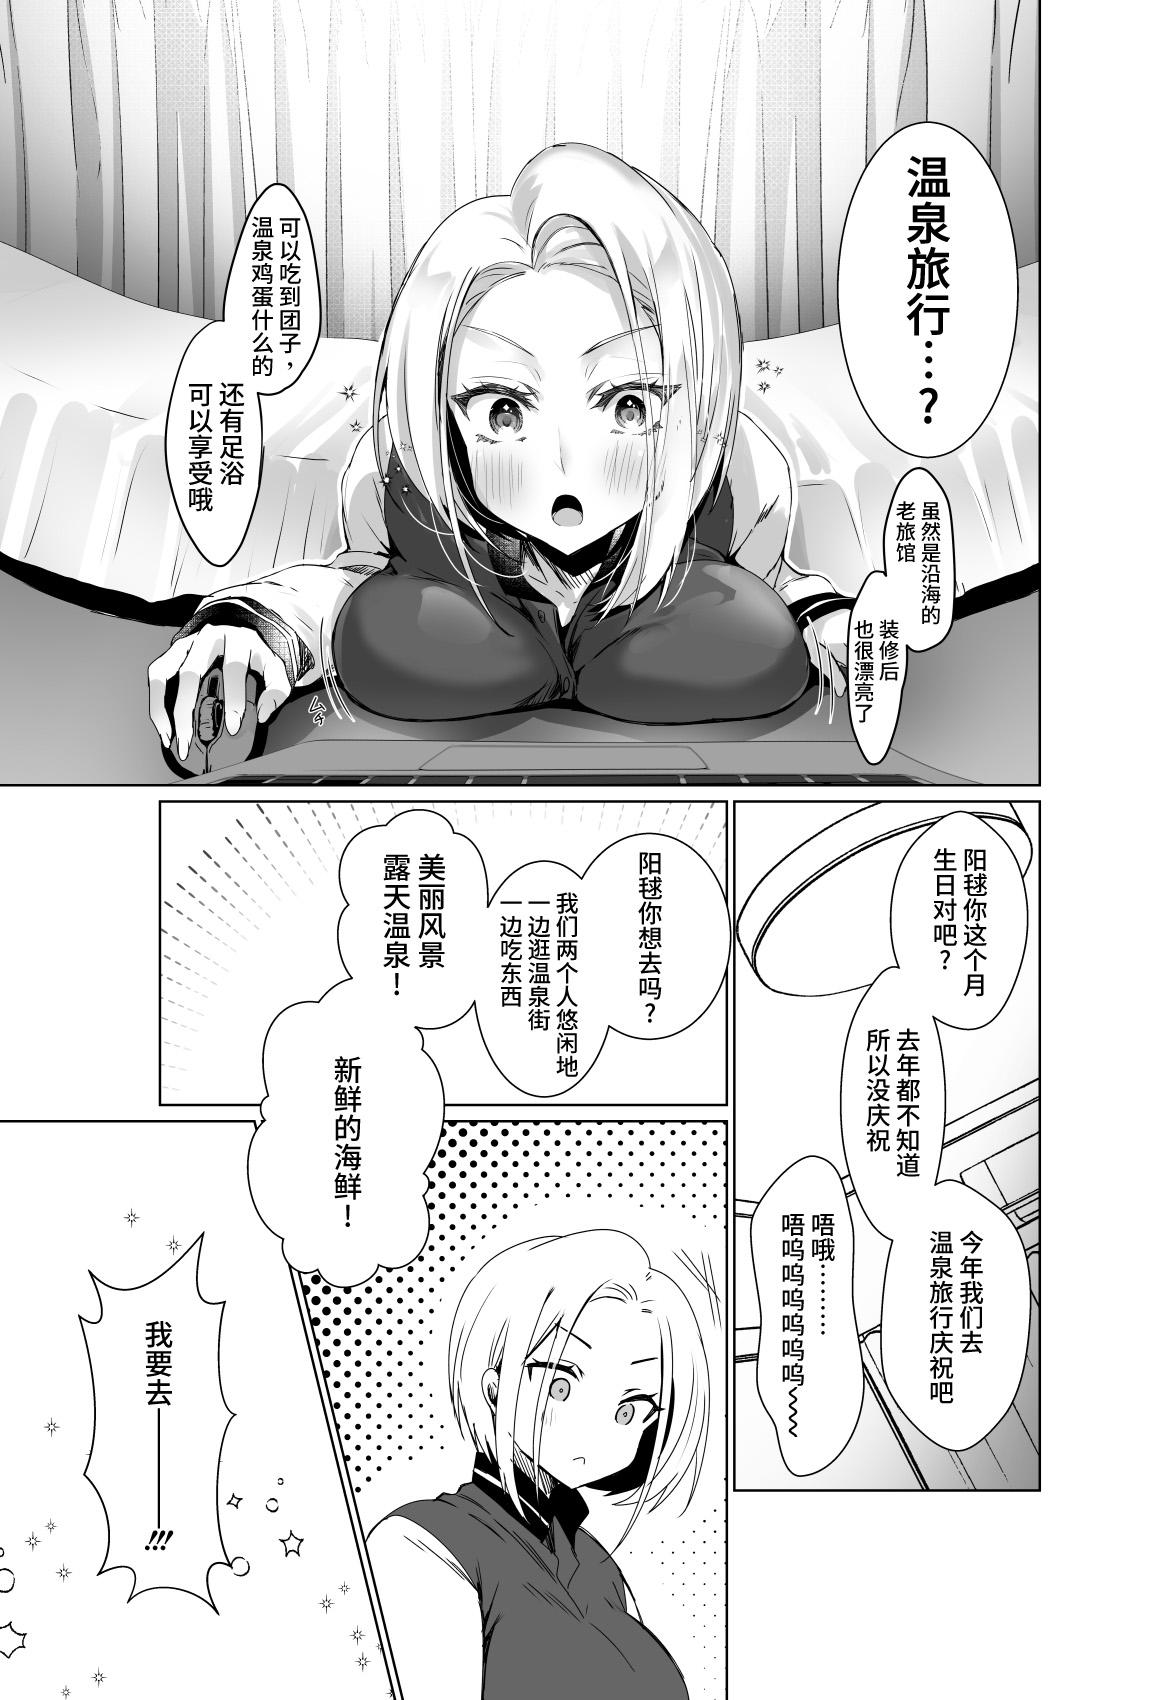 Home Oppai Delivery Himari After Onsen Hen - Original Ex Gf - Page 6